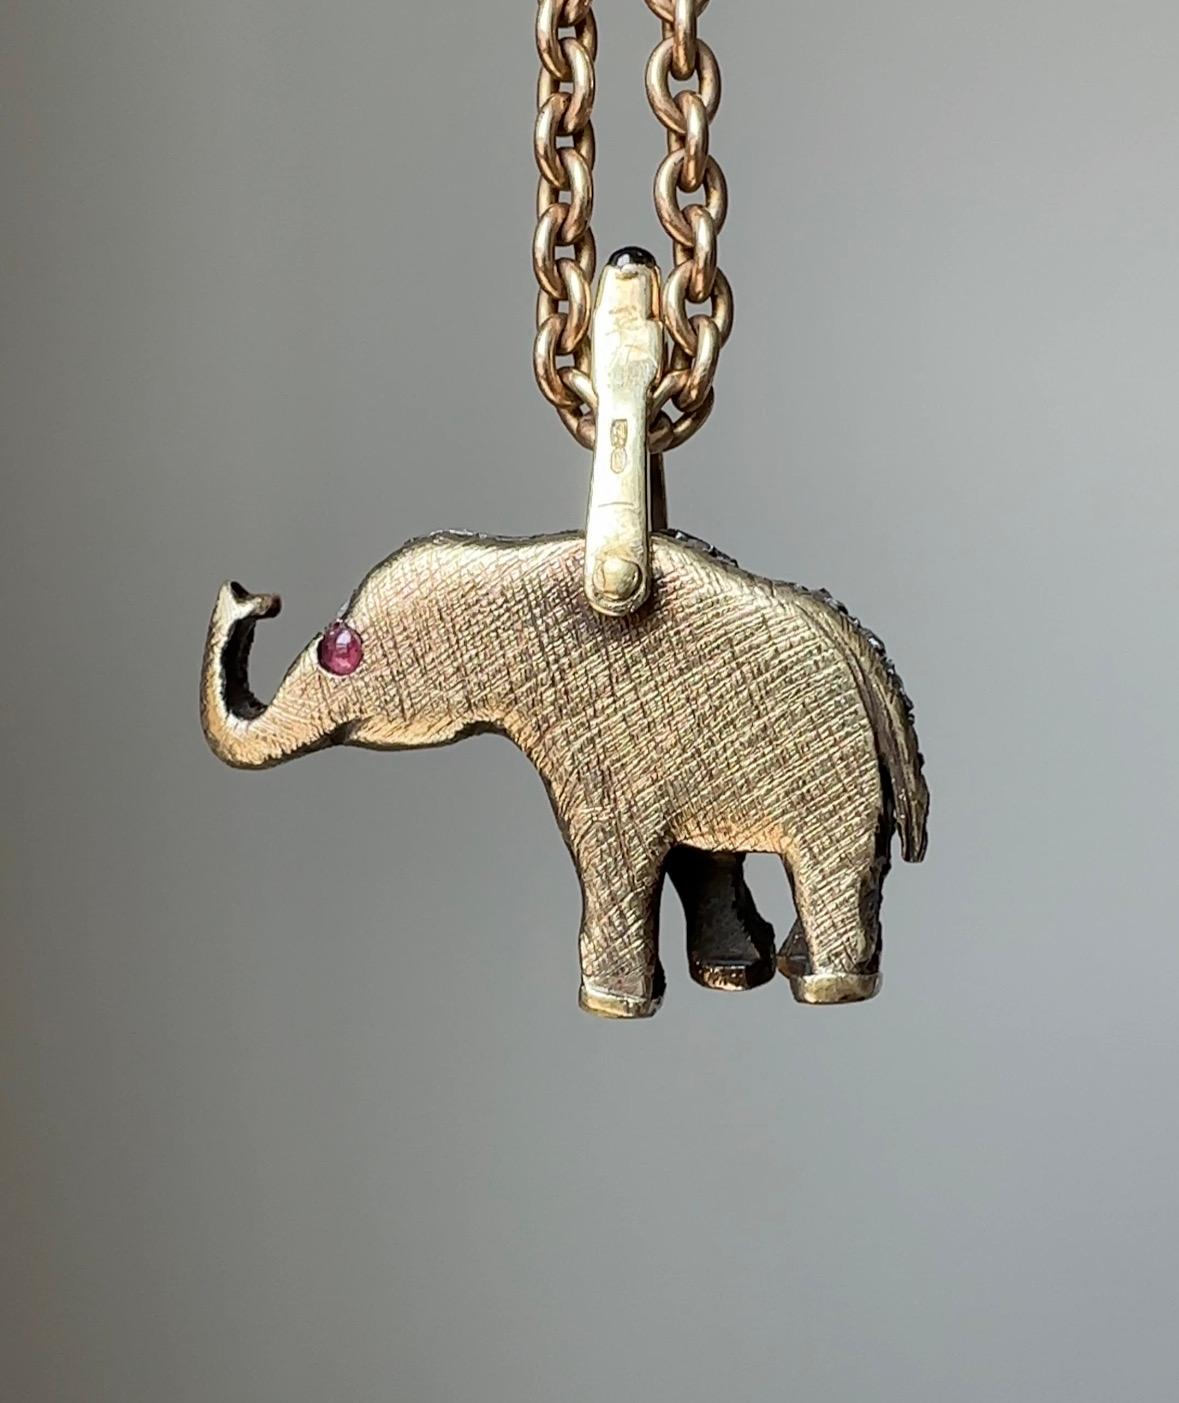 This whimsical rose-cut diamond elephant is both a symbol of strength and good luck, making this a wonderful talisman to add to your jewelry wardrobe. Artfully crafted in 14k gold and sterling silver, this handsome fella is complete with cabochon